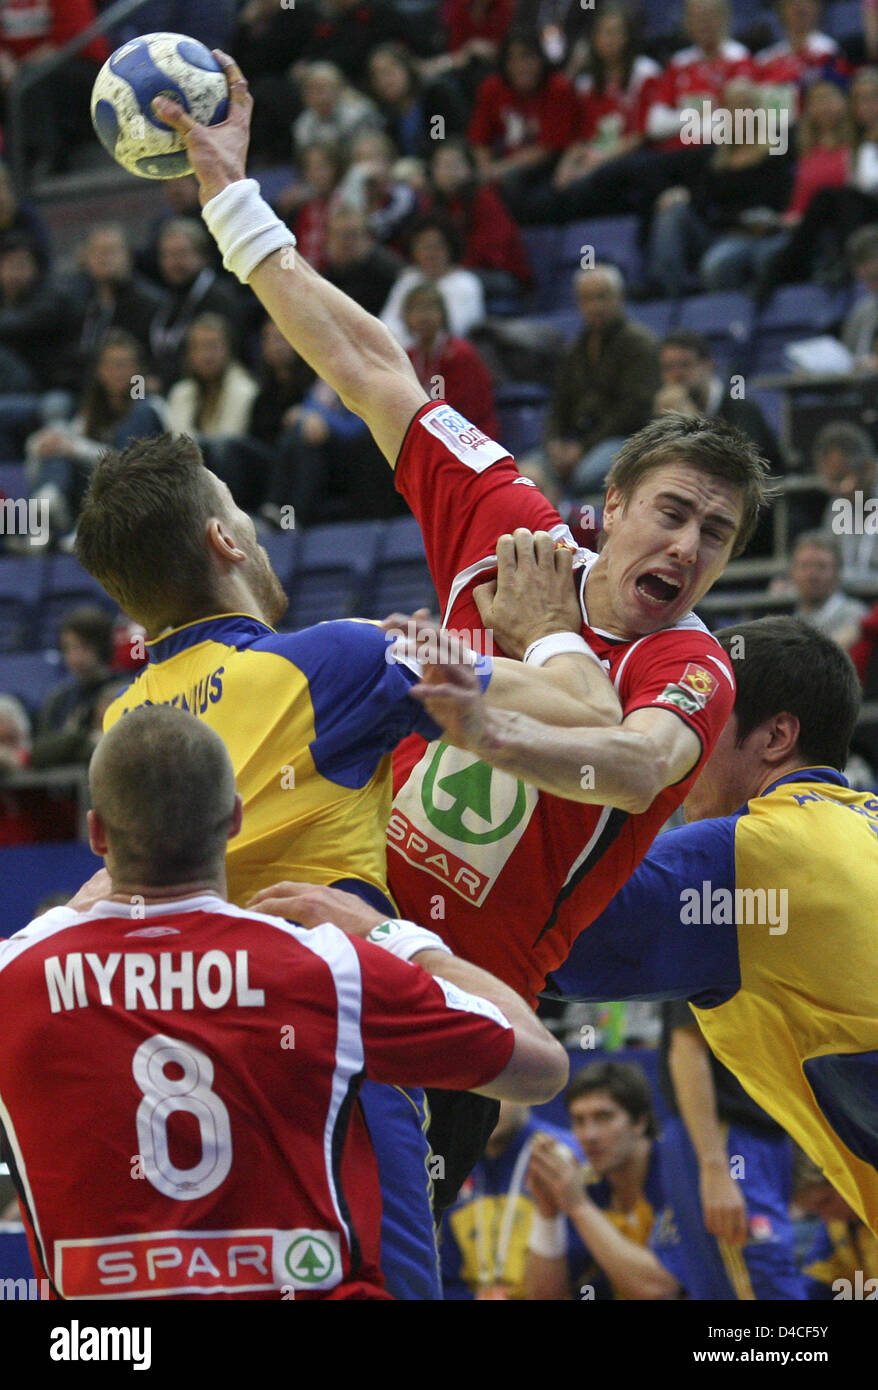 Andre Jorgensen (C) of Norway and Kim Andersson (R) and Robert Arrhenius (L) of Sweden shown in action in the match for fifth place during the Handball European Championships at Hakonshall in Lillehammer, Norway, 26 January 2008. Photo: JENS WOLF Stock Photo